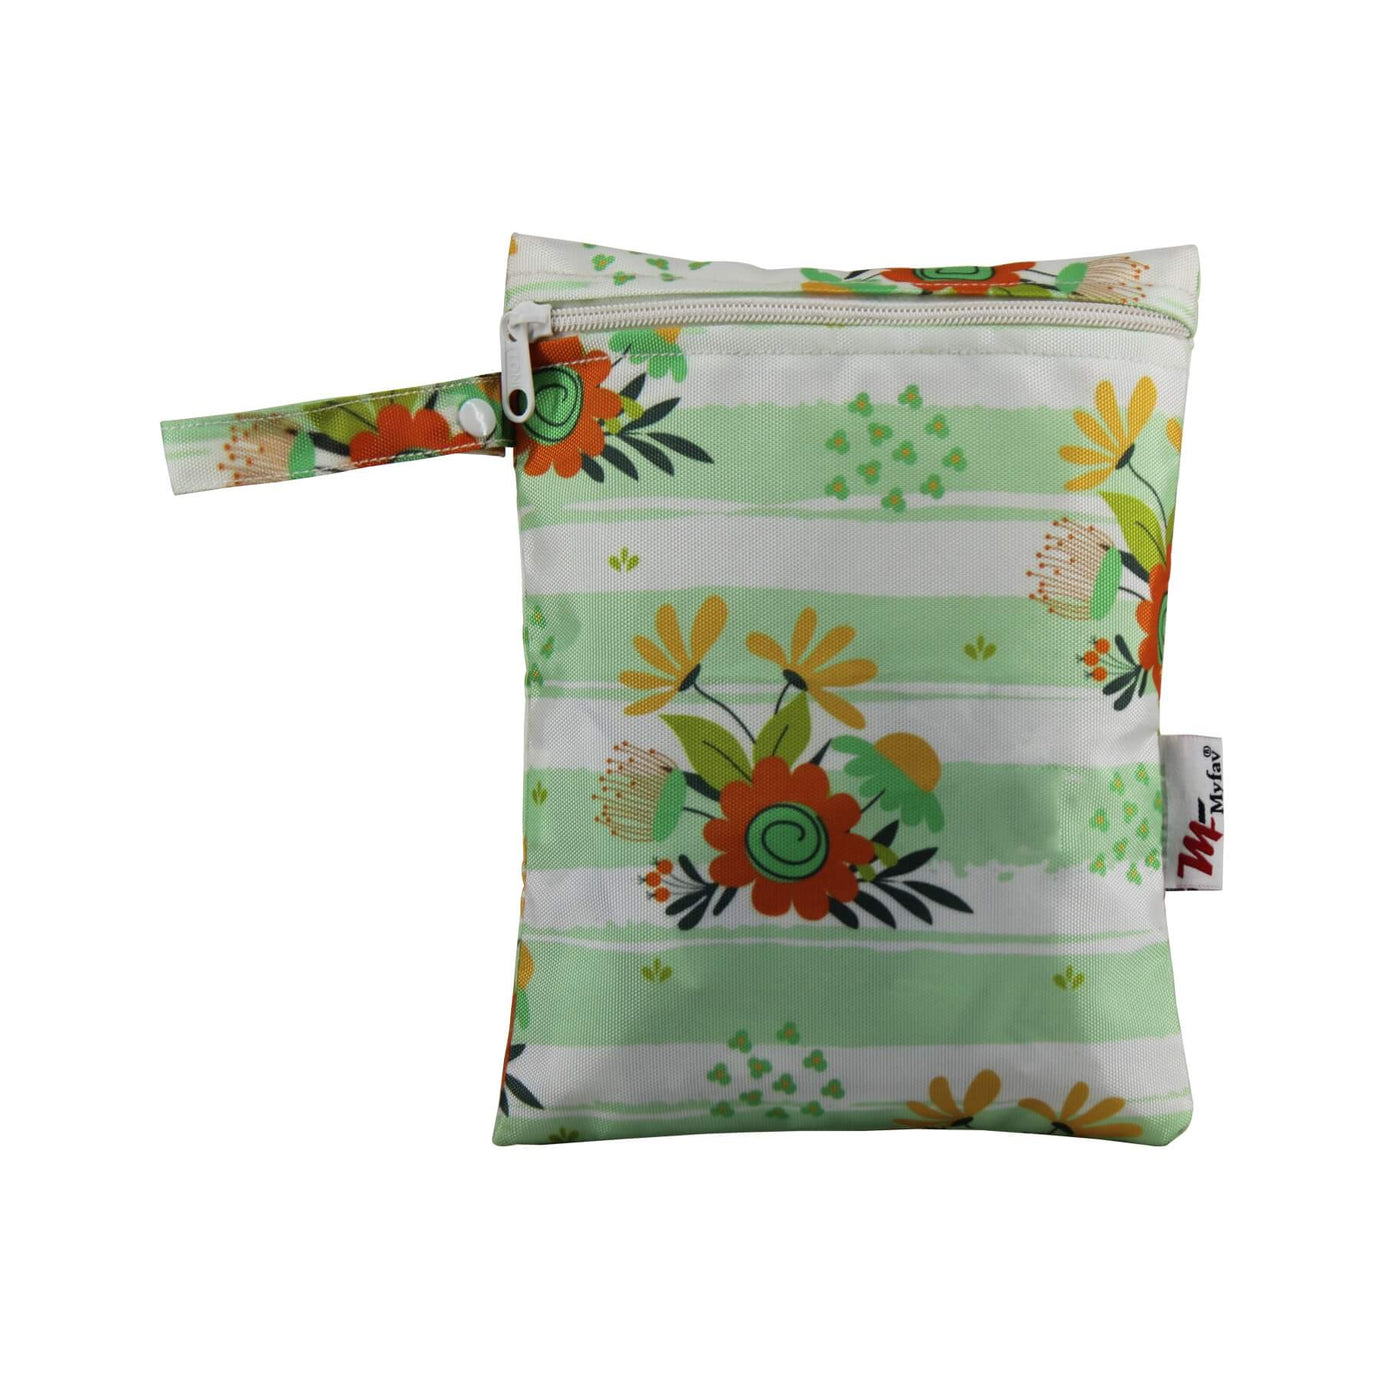 My Fav Floral Print Green Multiutility Wet Dry Pouch/Diaper Bag/Travel Pouch/Travel Kit